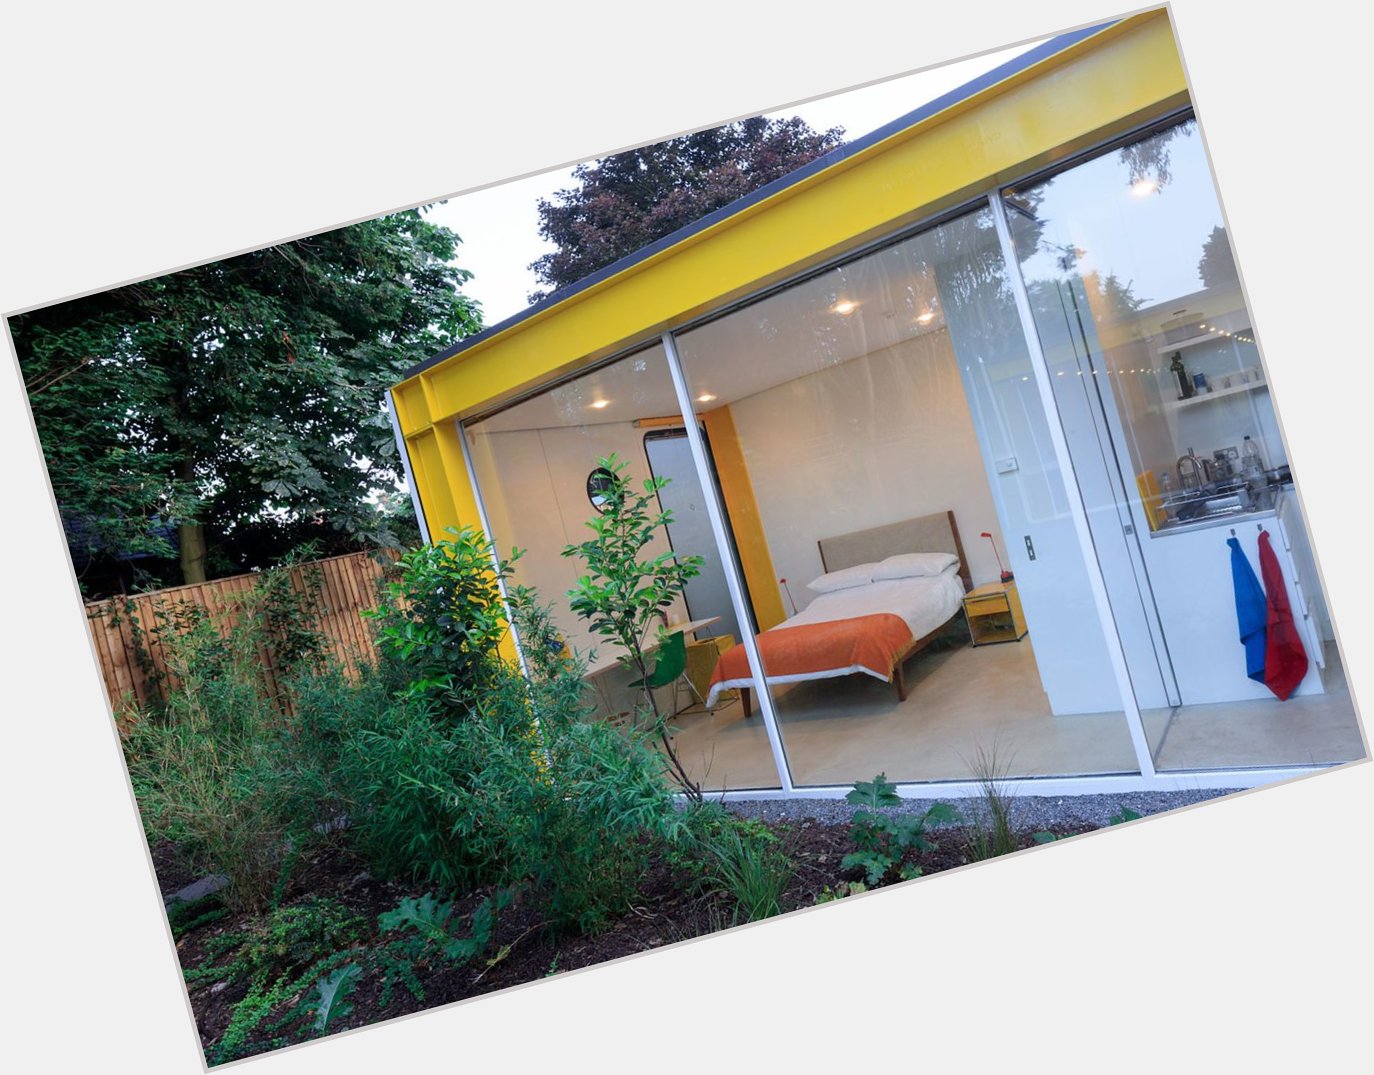 Happy birthday Richard Rogers.

Pictured: Wimbledon House shot by Iwan Baan  